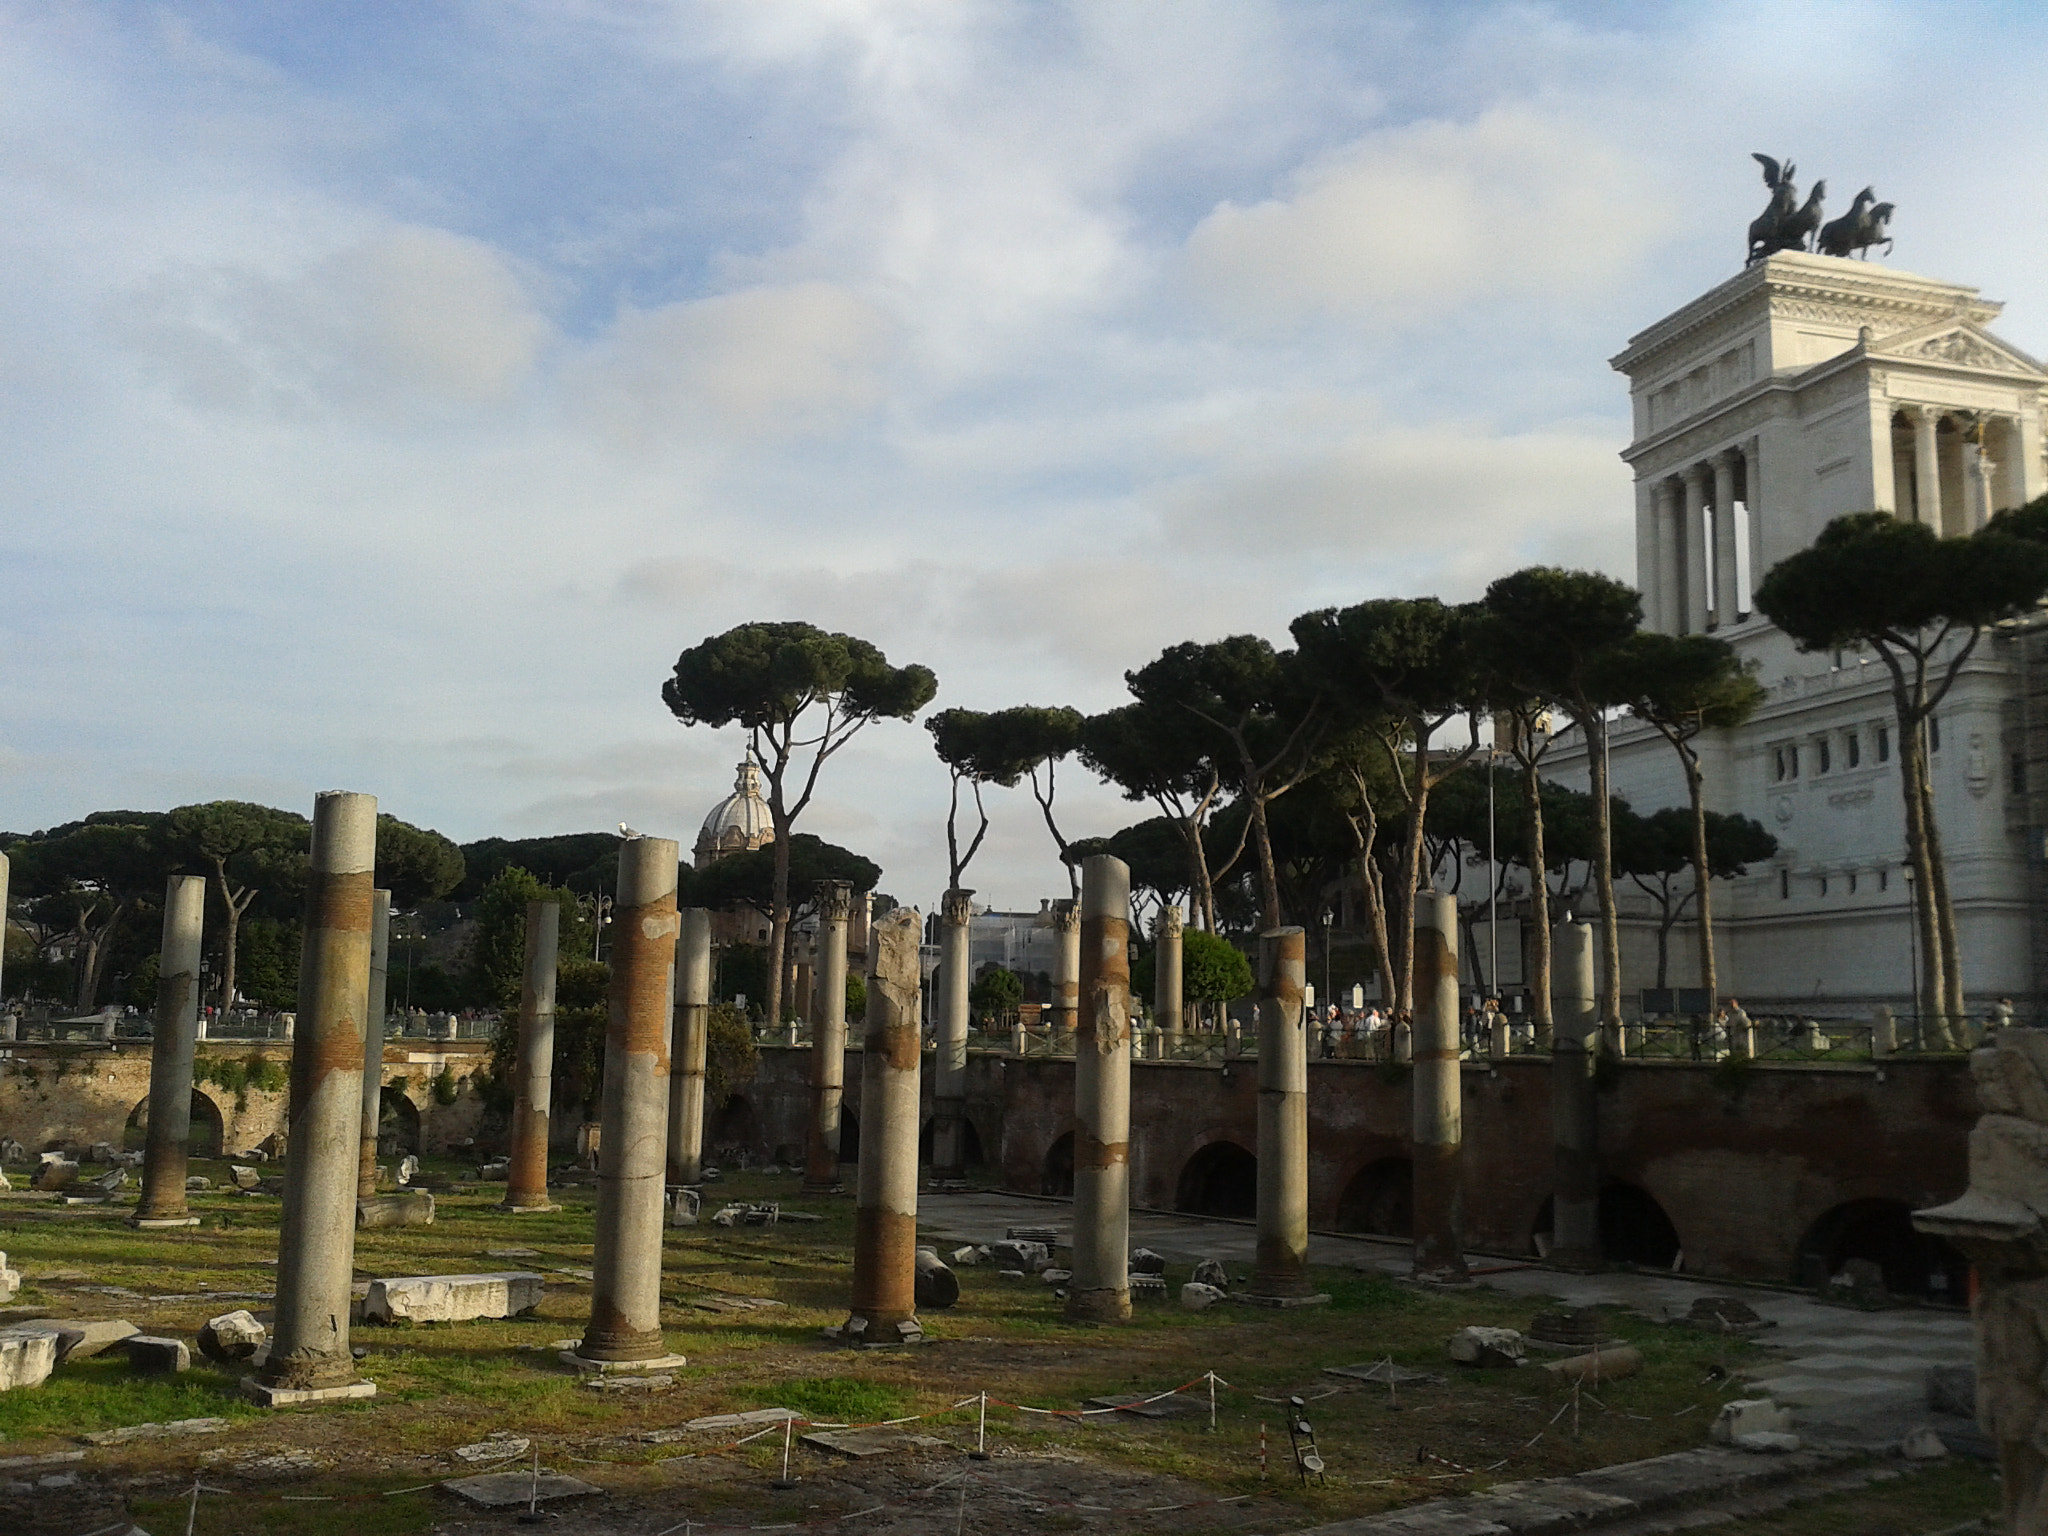 Samsung Galaxy S Advance sample photo. Old ruins from rome, italy photography